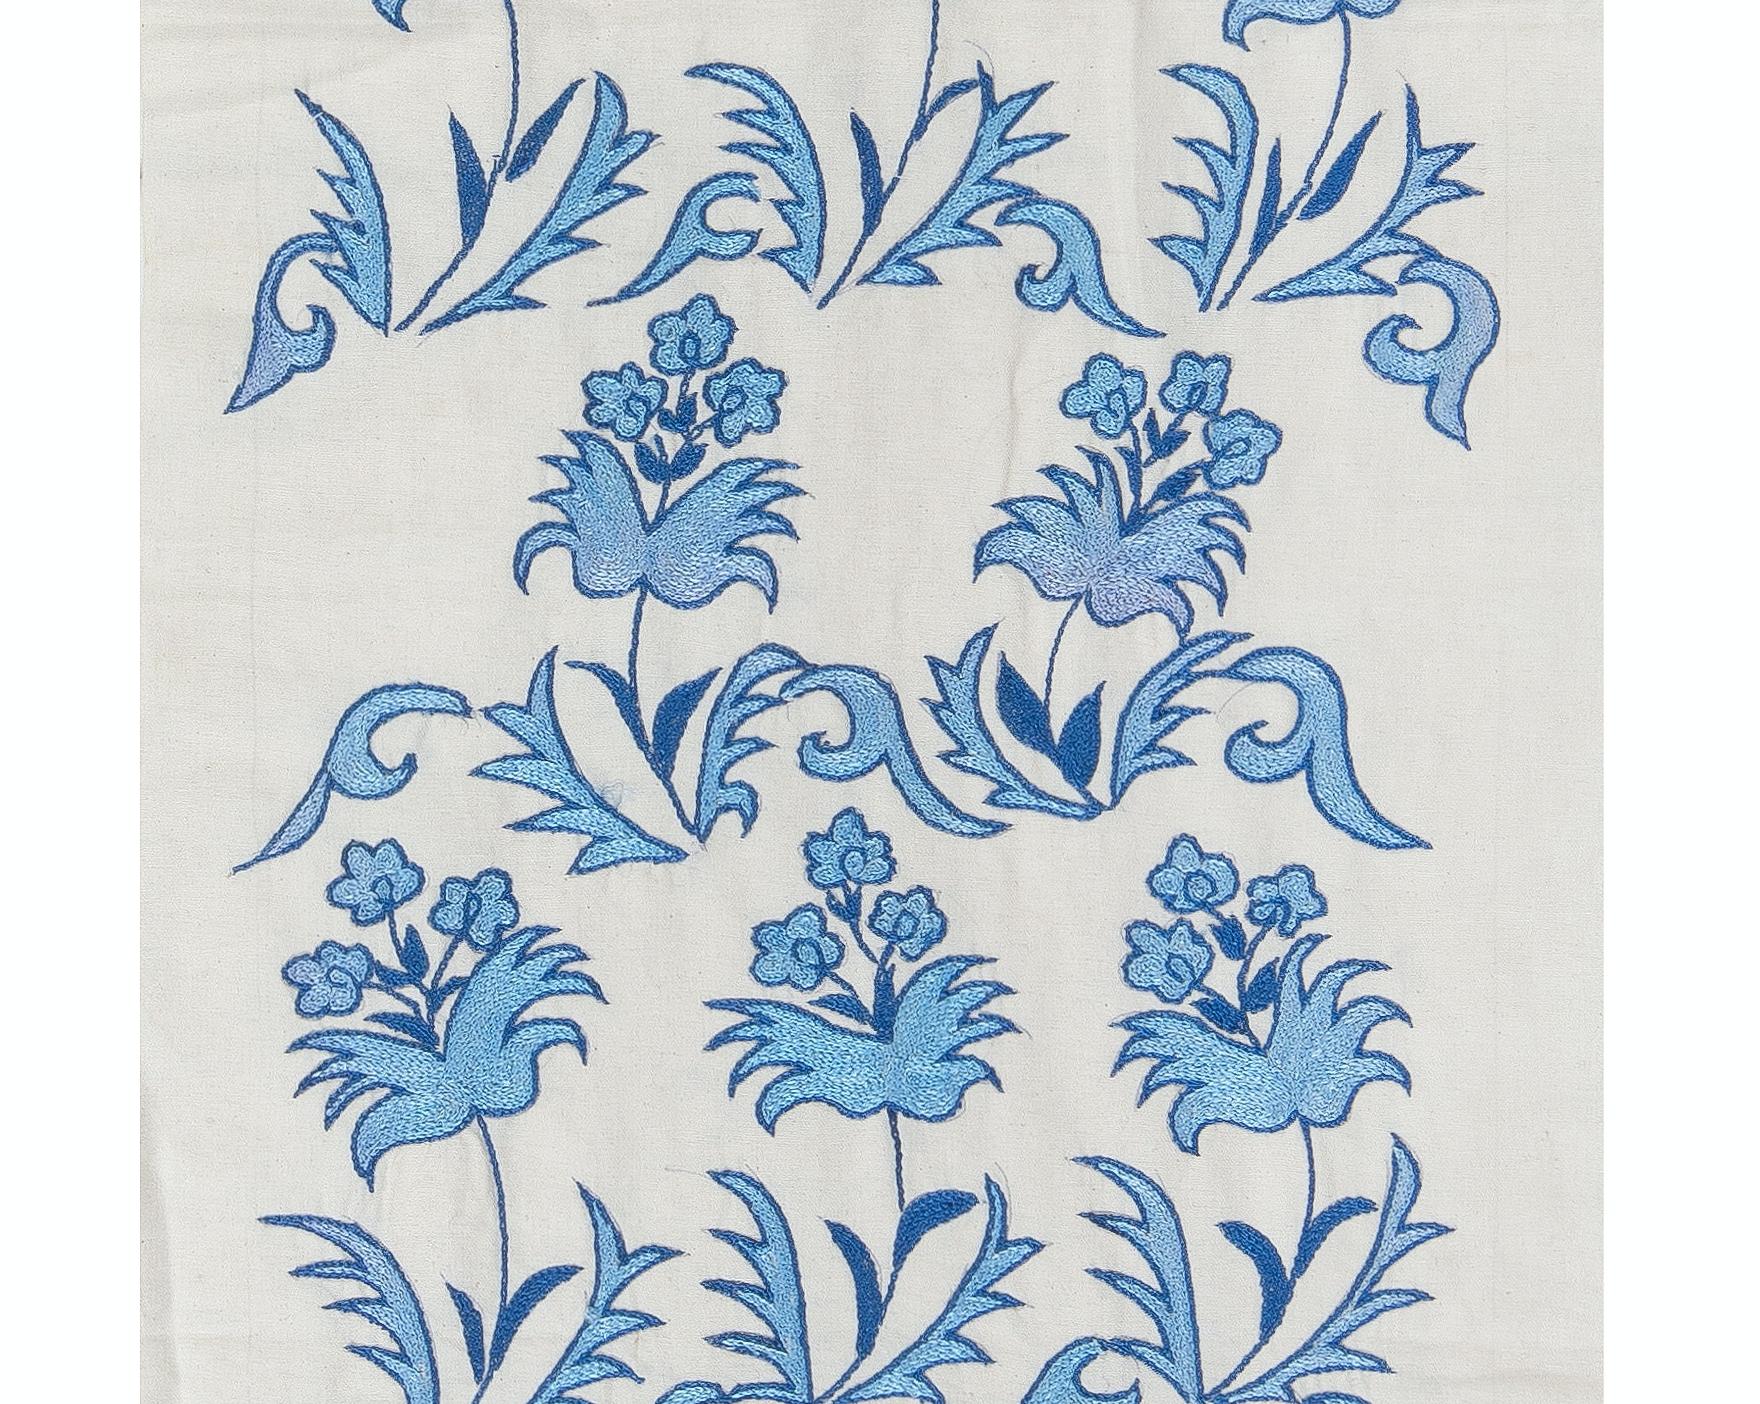 Brodé 1.7x6.3 Ft Floral Suzani Table Runner, Embroidered Cotton & Silk Wall Hanging en vente